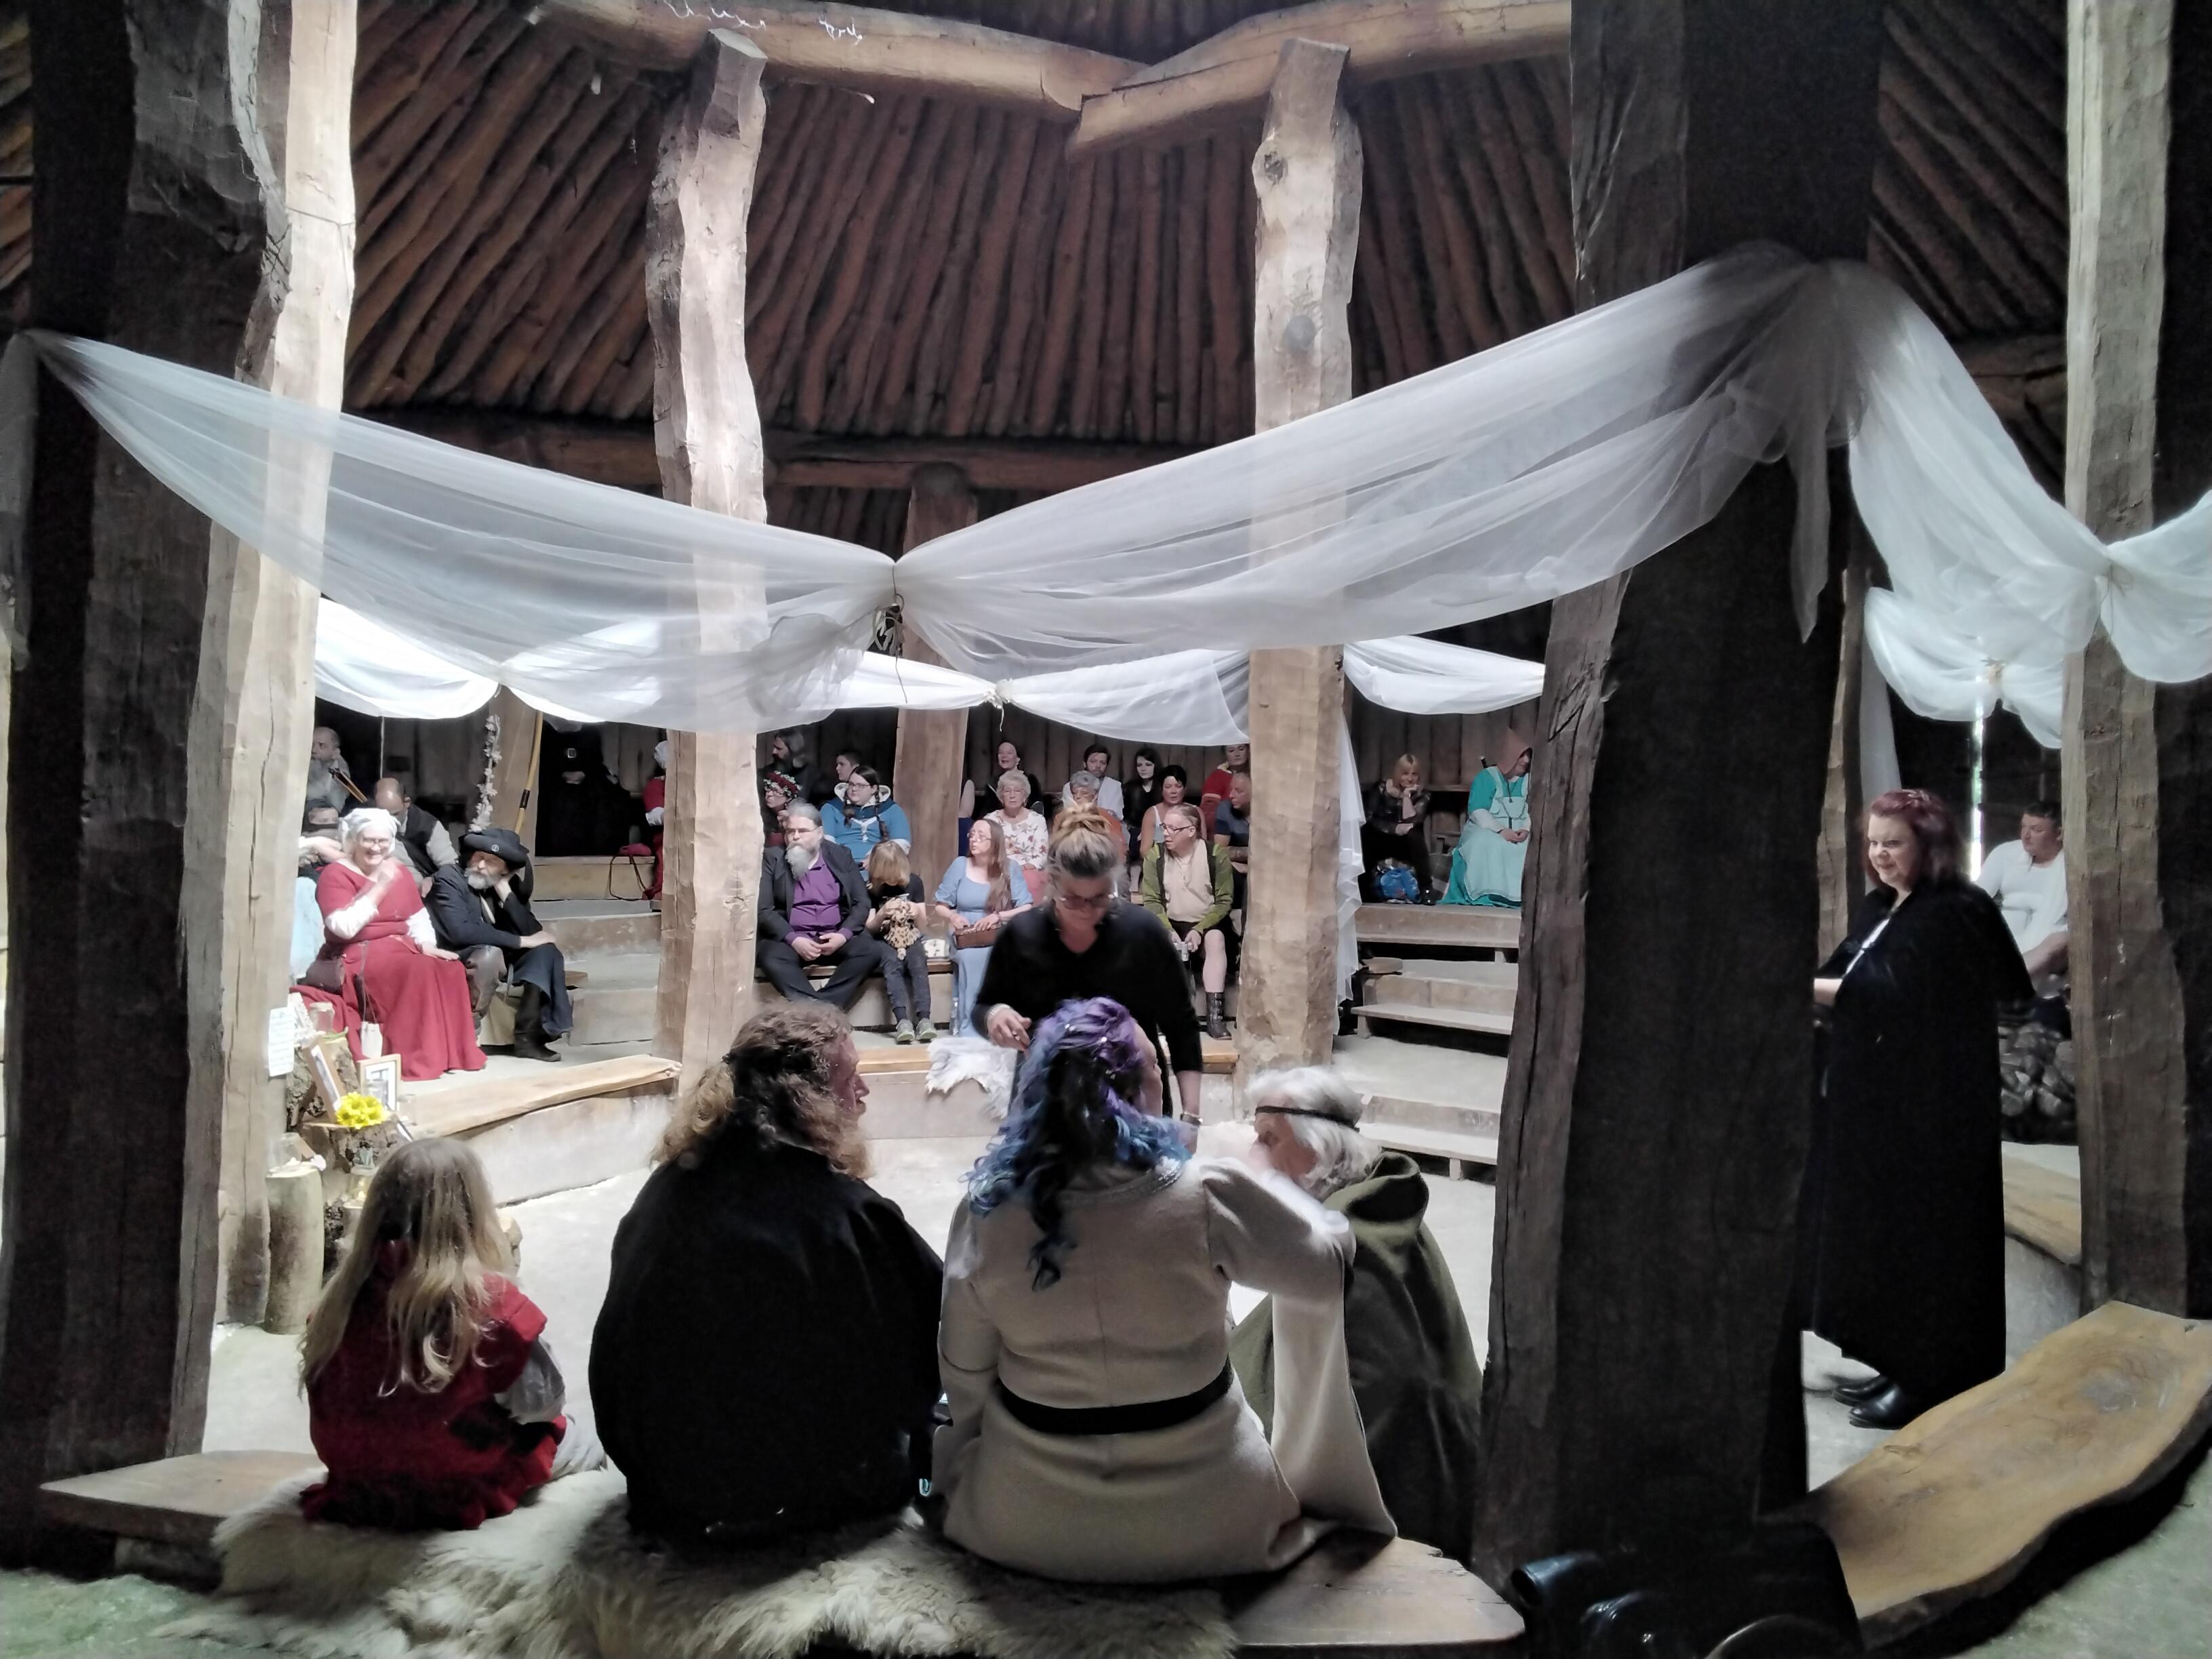 A ceremony inside the Earthouse